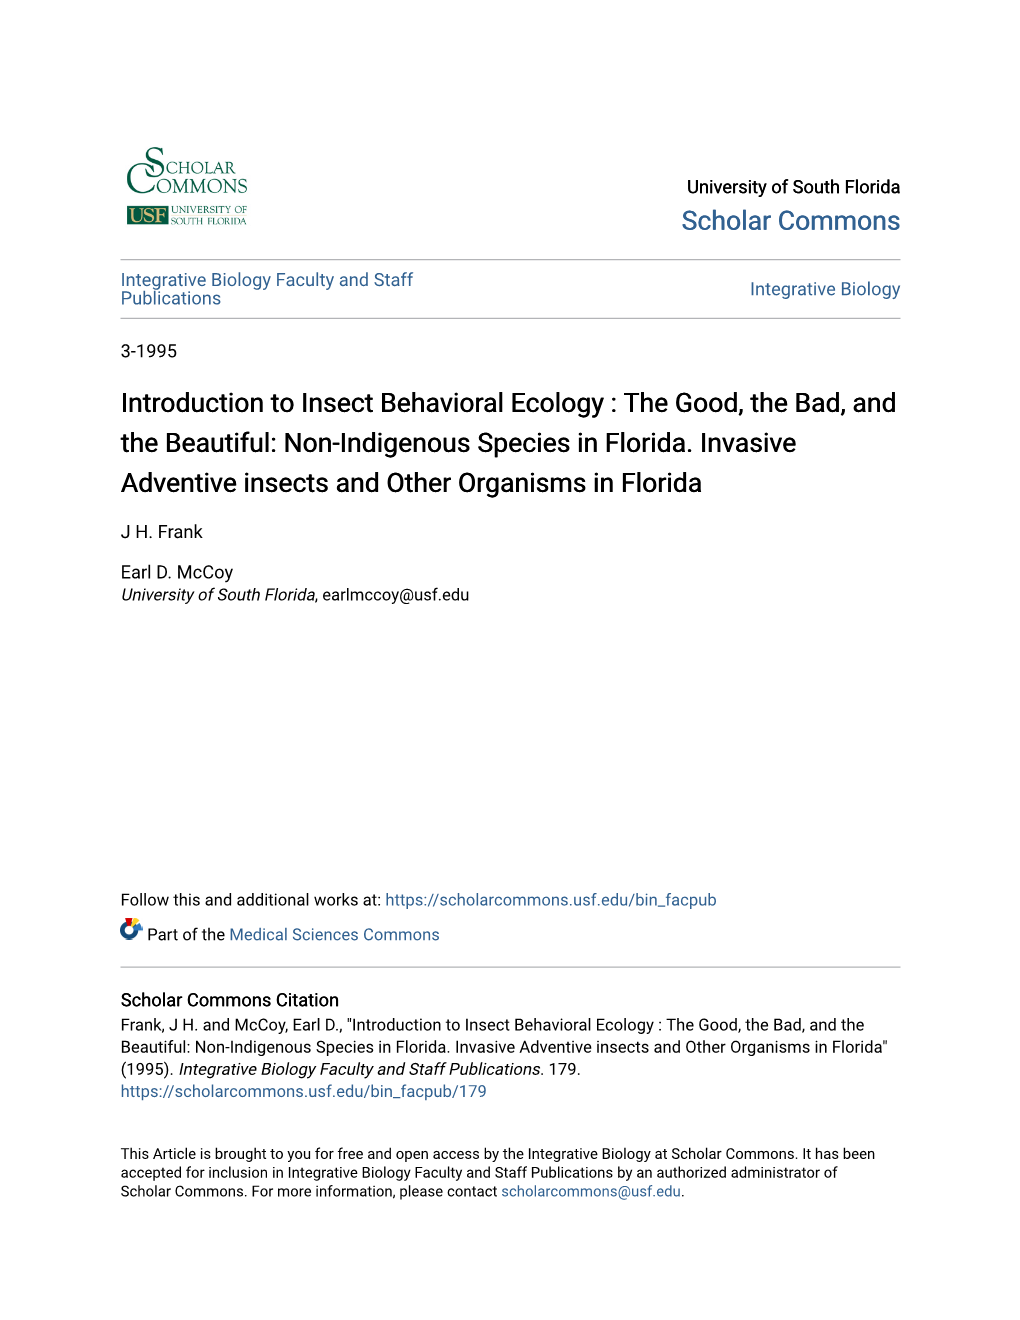 Introduction to Insect Behavioral Ecology : the Good, the Bad, and the Beautiful: Non-Indigenous Species in Florida